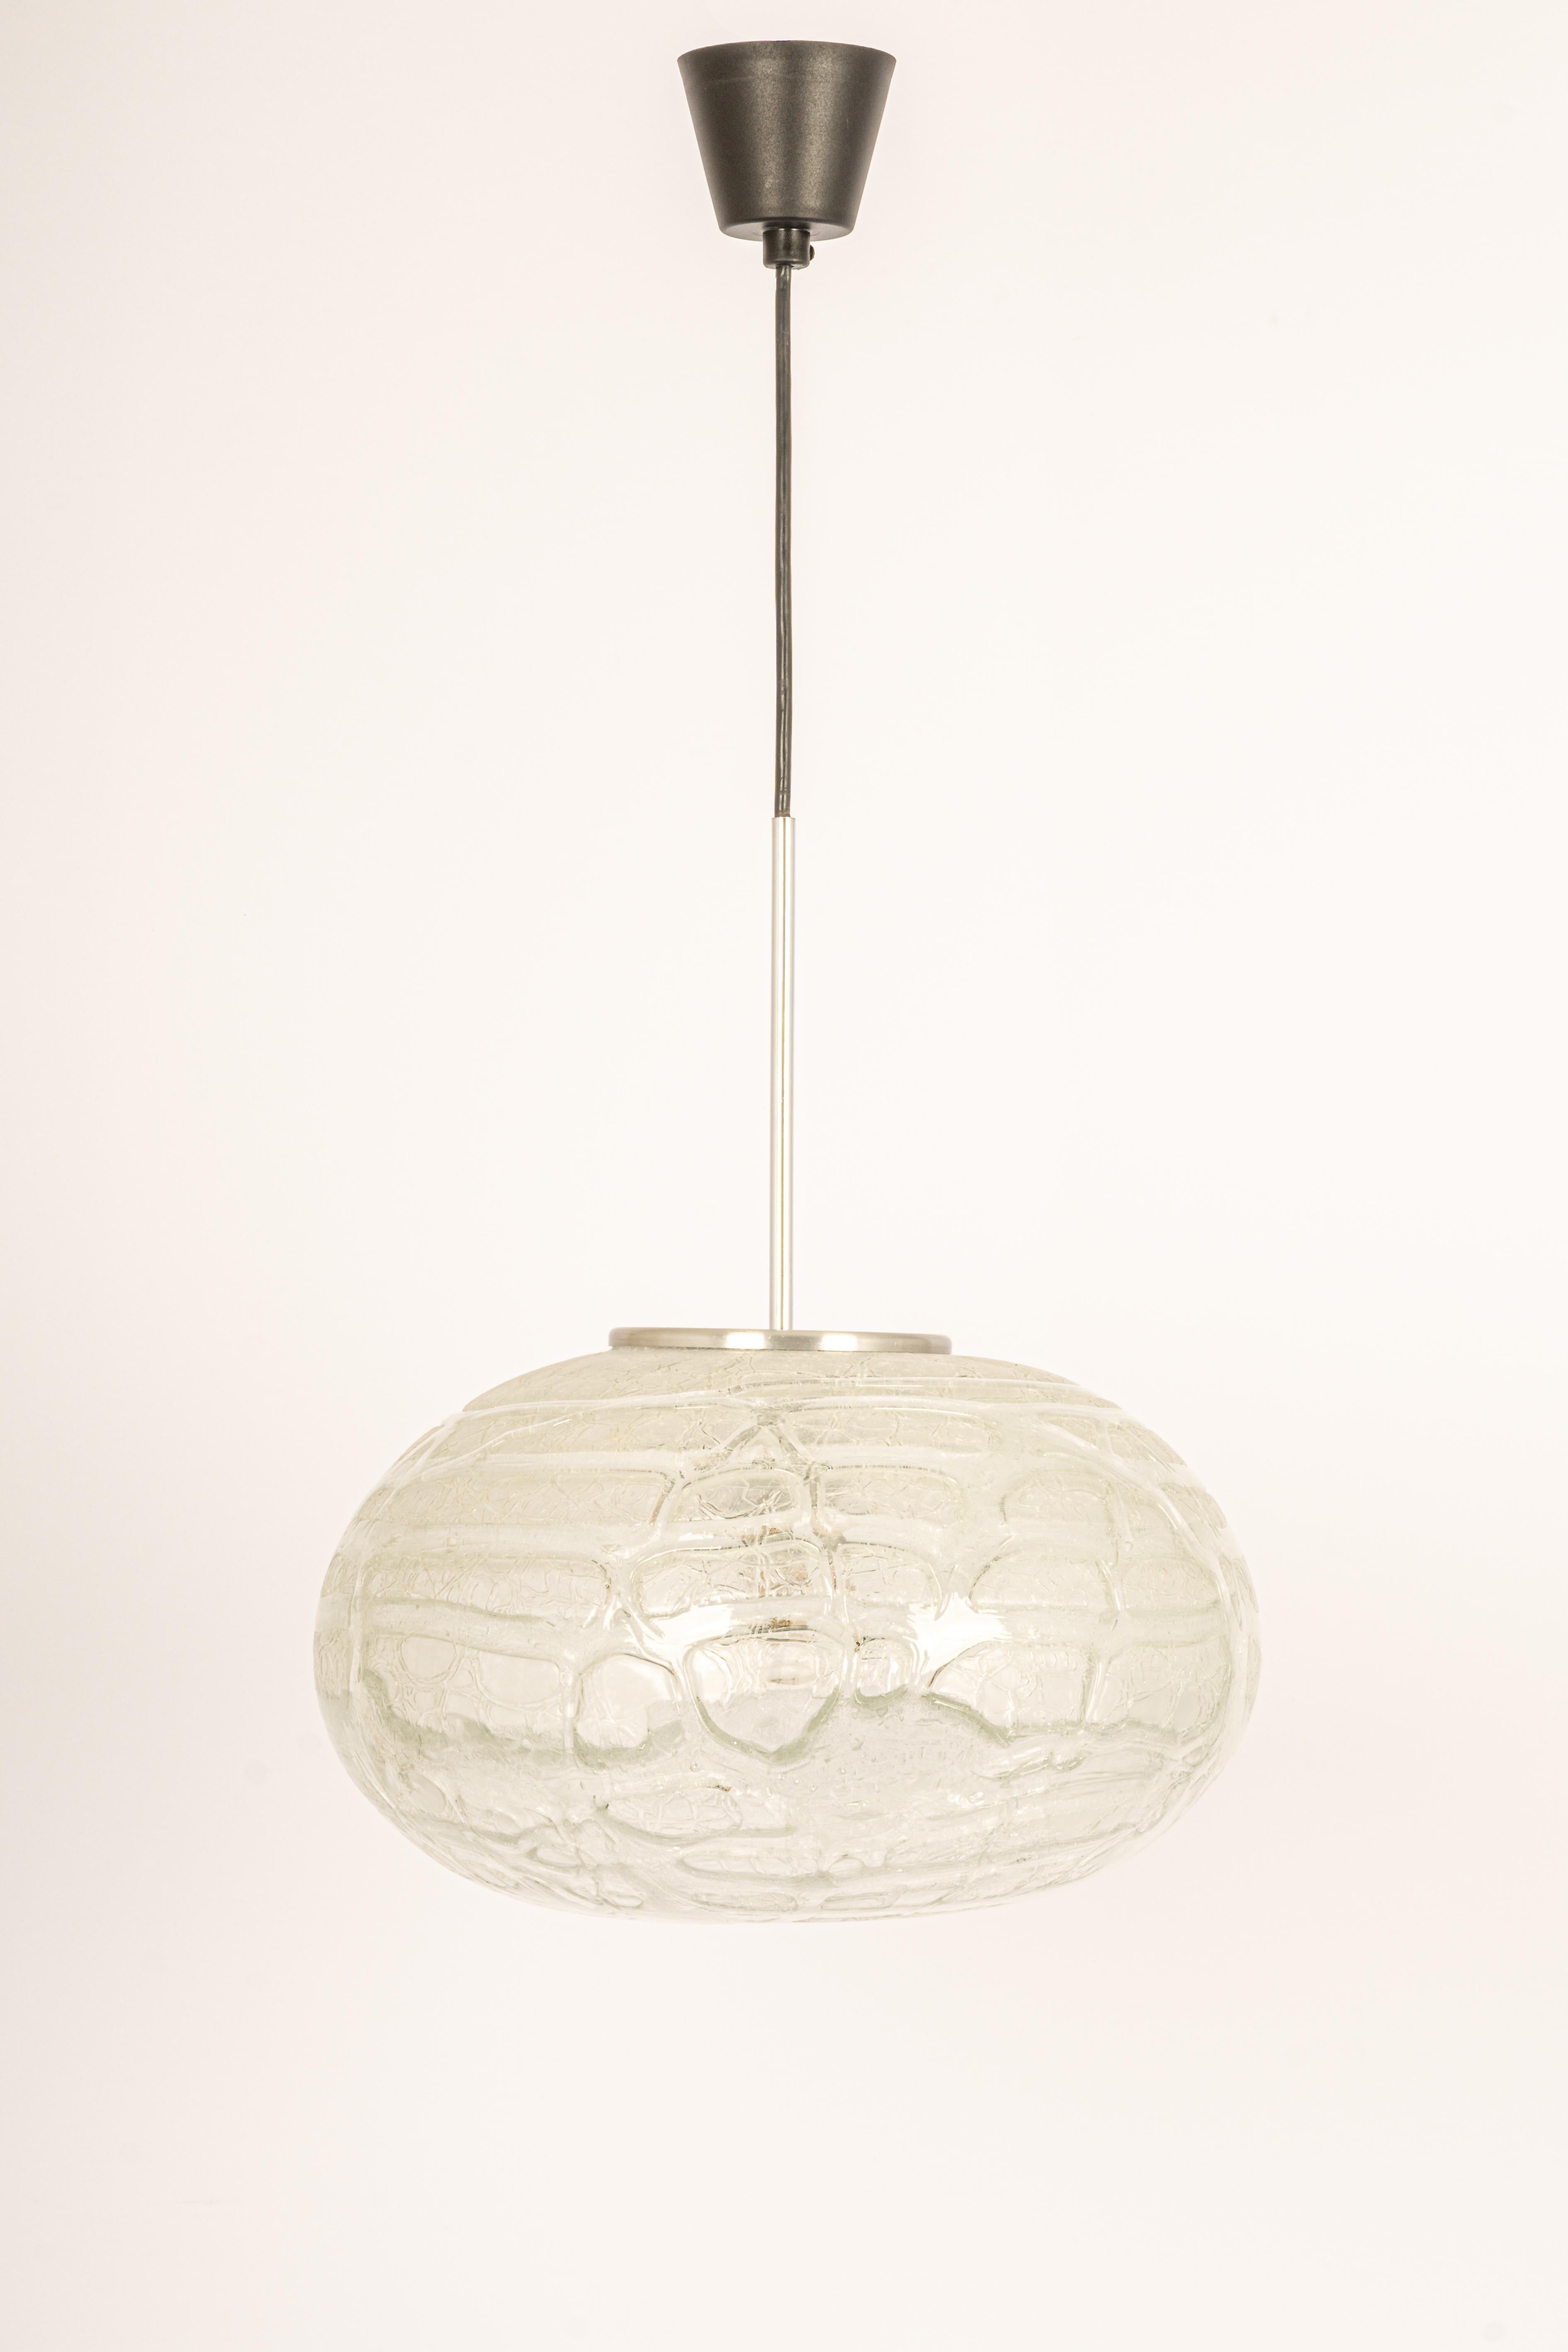 Doria ceiling light with large volcanic Murano glass ball.
High quality materials, gives a wonderful light effect when it is on.
Very good condition. Cleaned, well-wired, and ready to use. 

The fixture requires one standard bulb (E-27)
Light